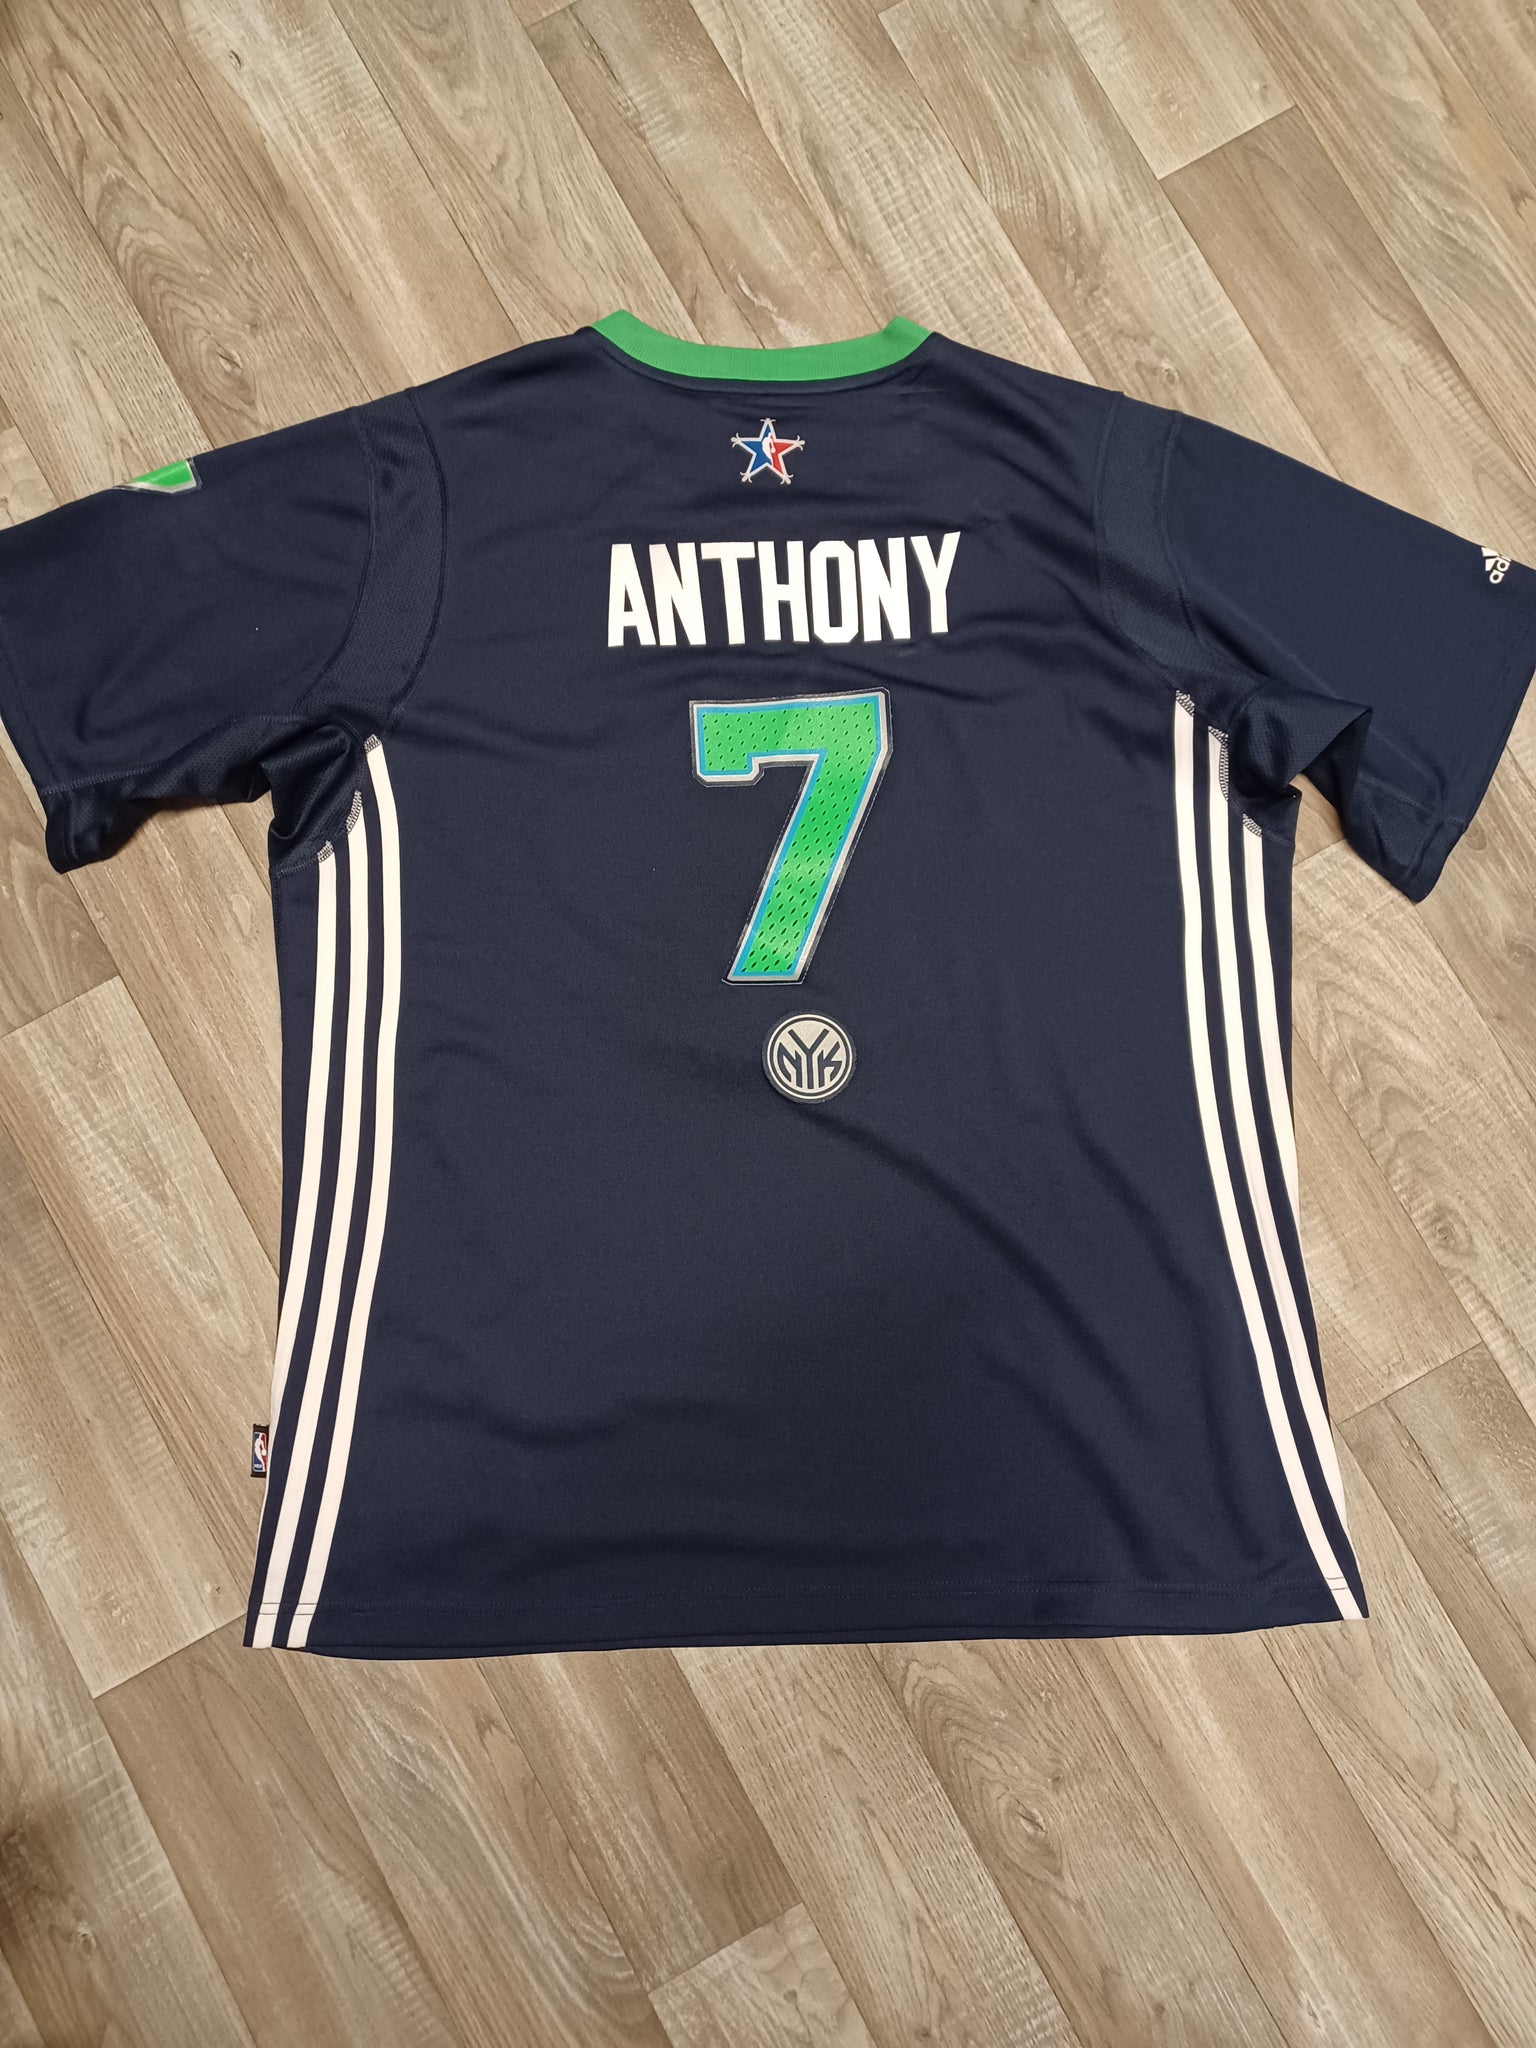 🏀 Carmelo Anthony NBA All Star 2014 Jersey Size XL – The